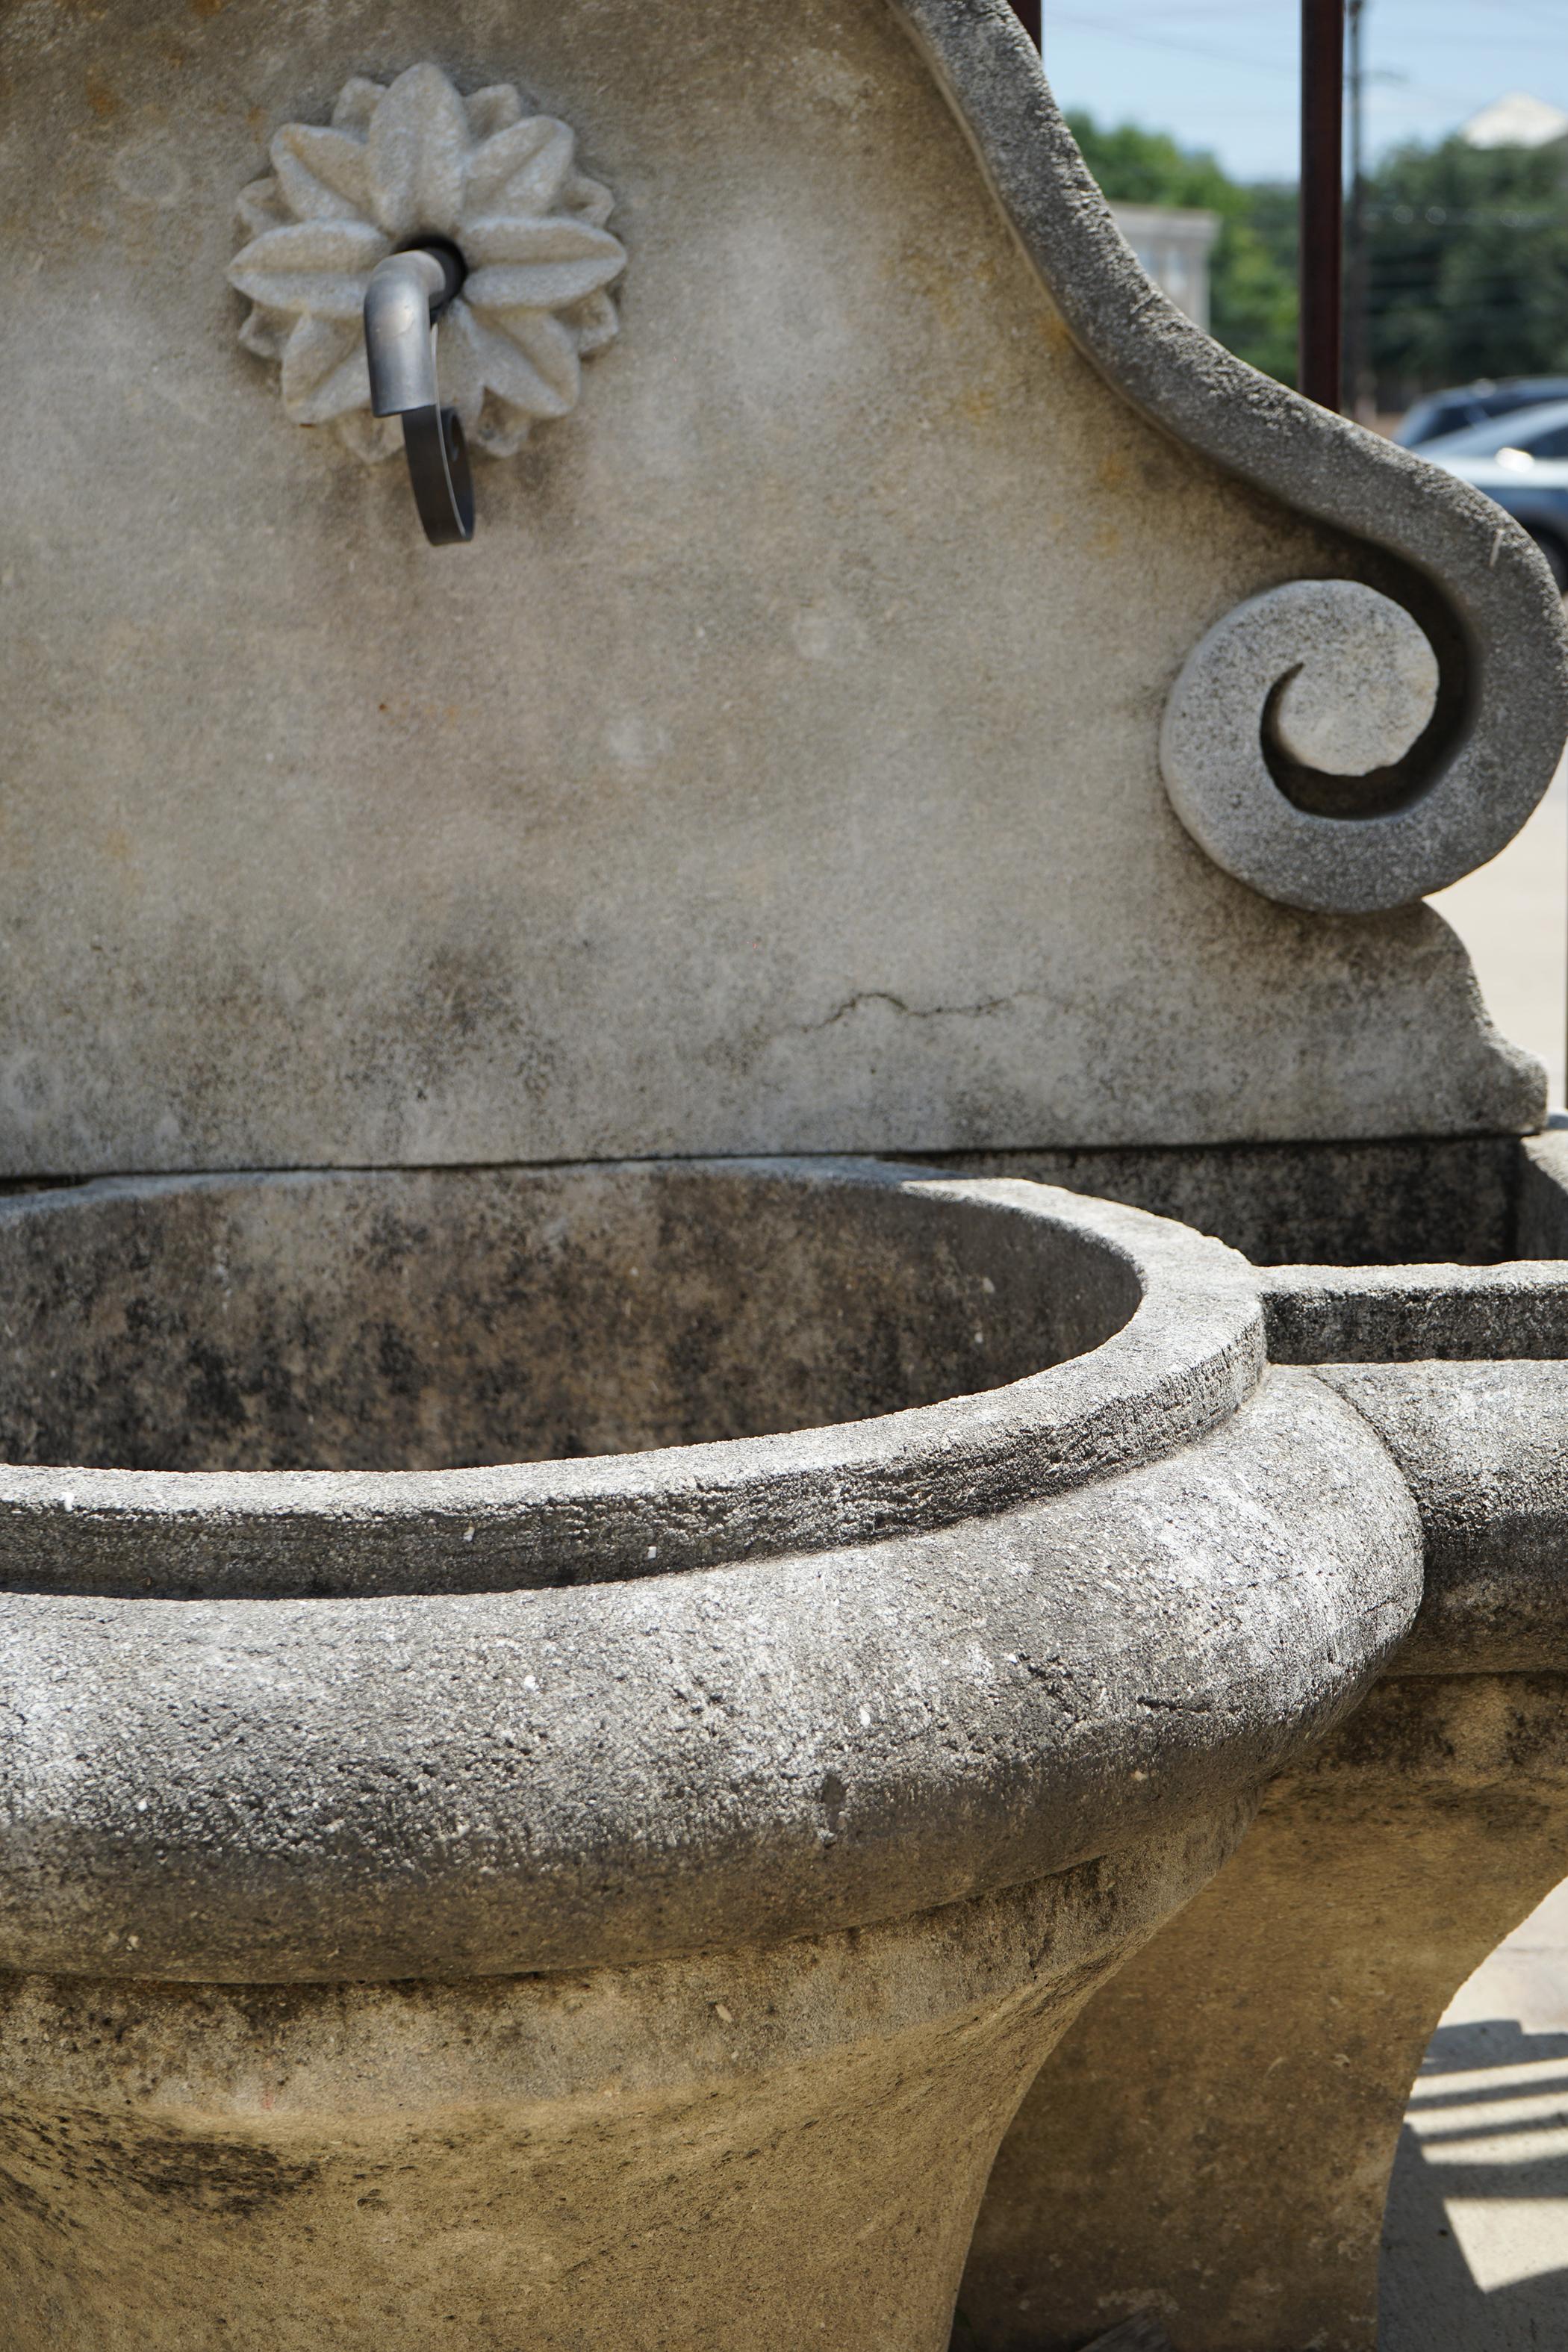 This limestone wall fountain has a circular basin to catch and return the water, but it also has two smaller separate areas carved out to each side for planting seasonal flowers or greenery. The water exit on the back plate has a beautiful lilly